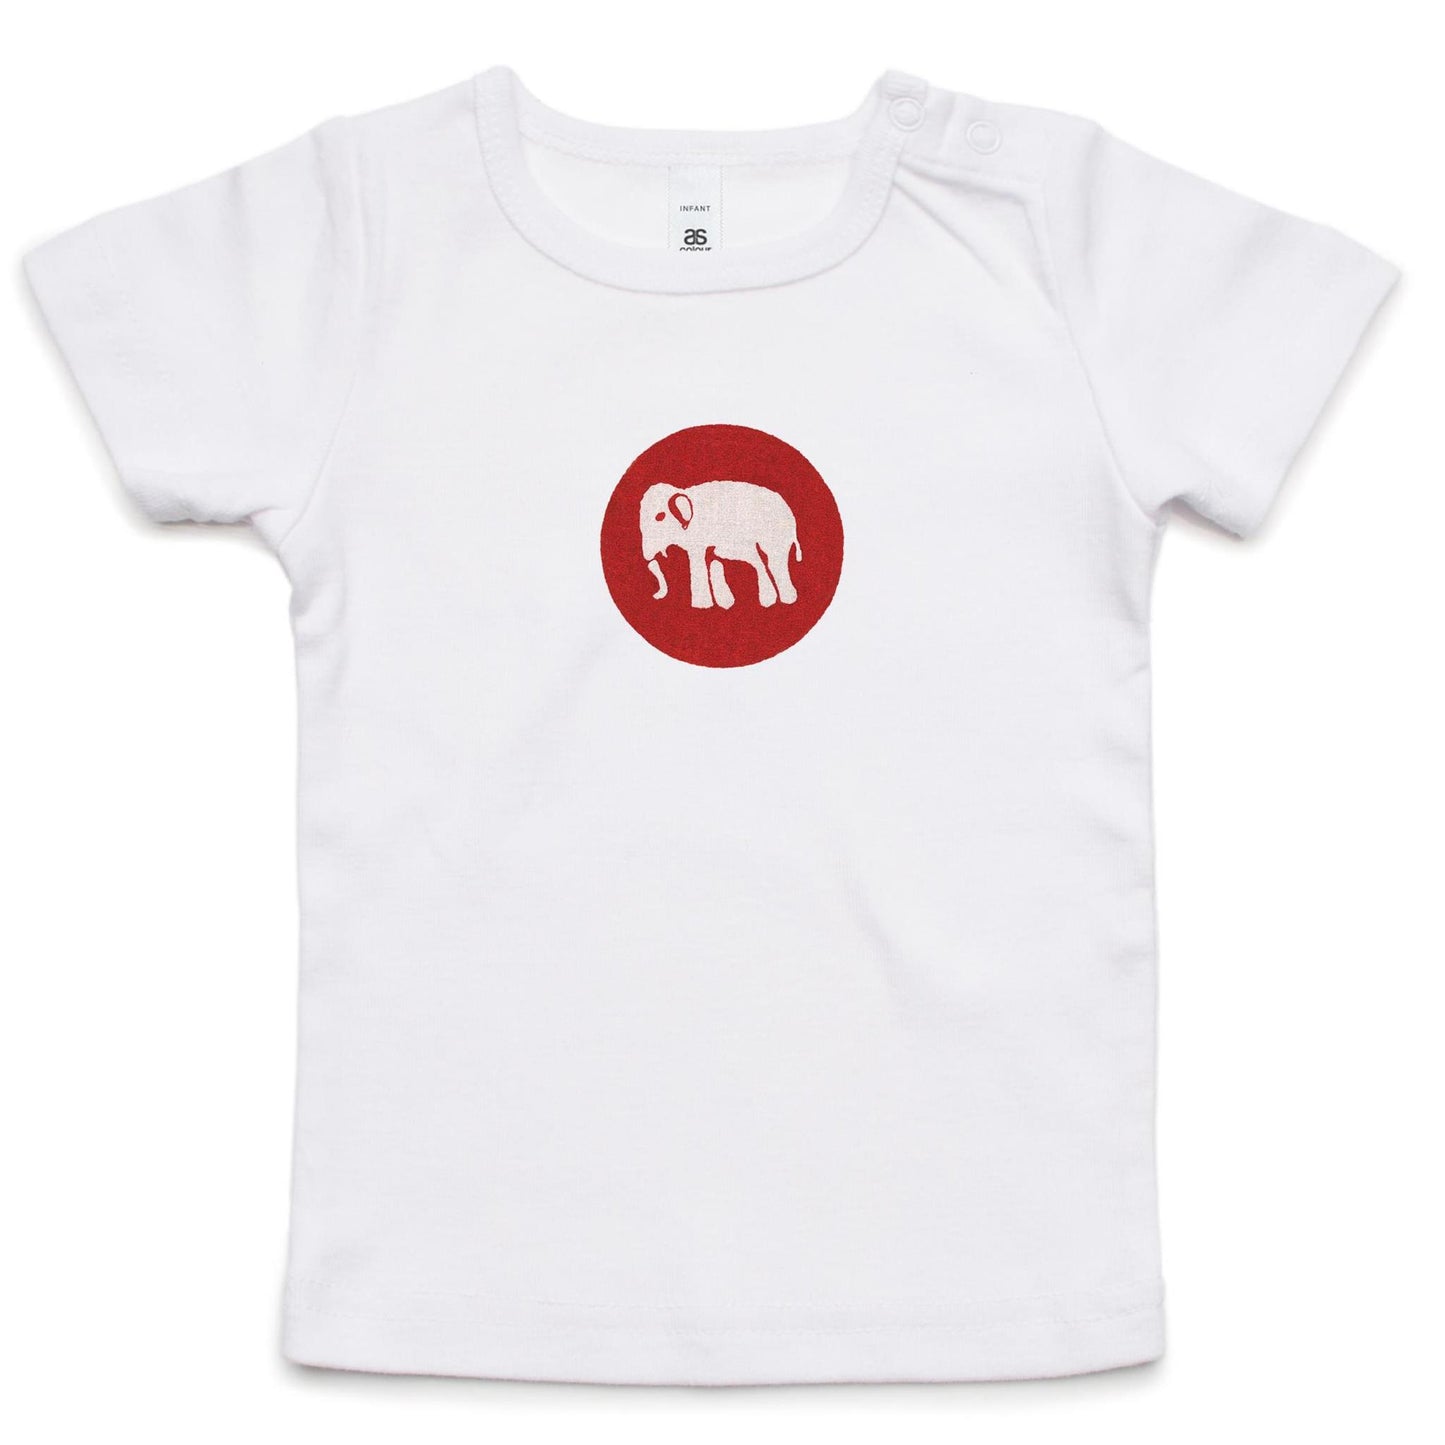 Elephant T Shirts for Babies